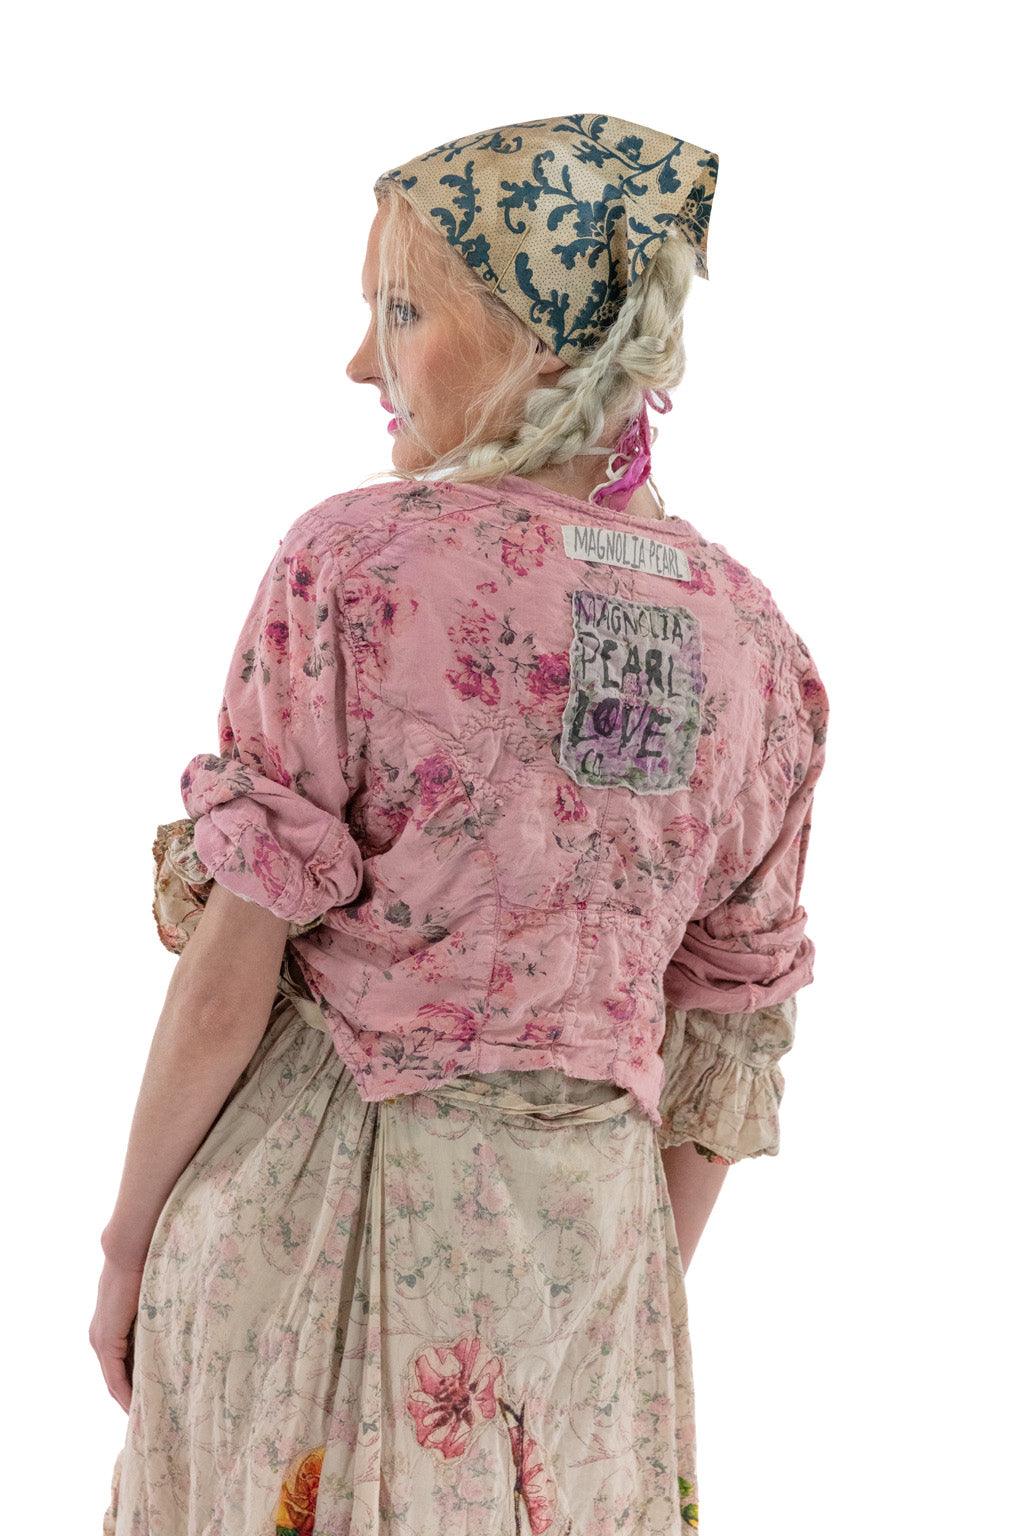 Floral Odetta Cropped Jacket - Magnolia Pearl Clothing